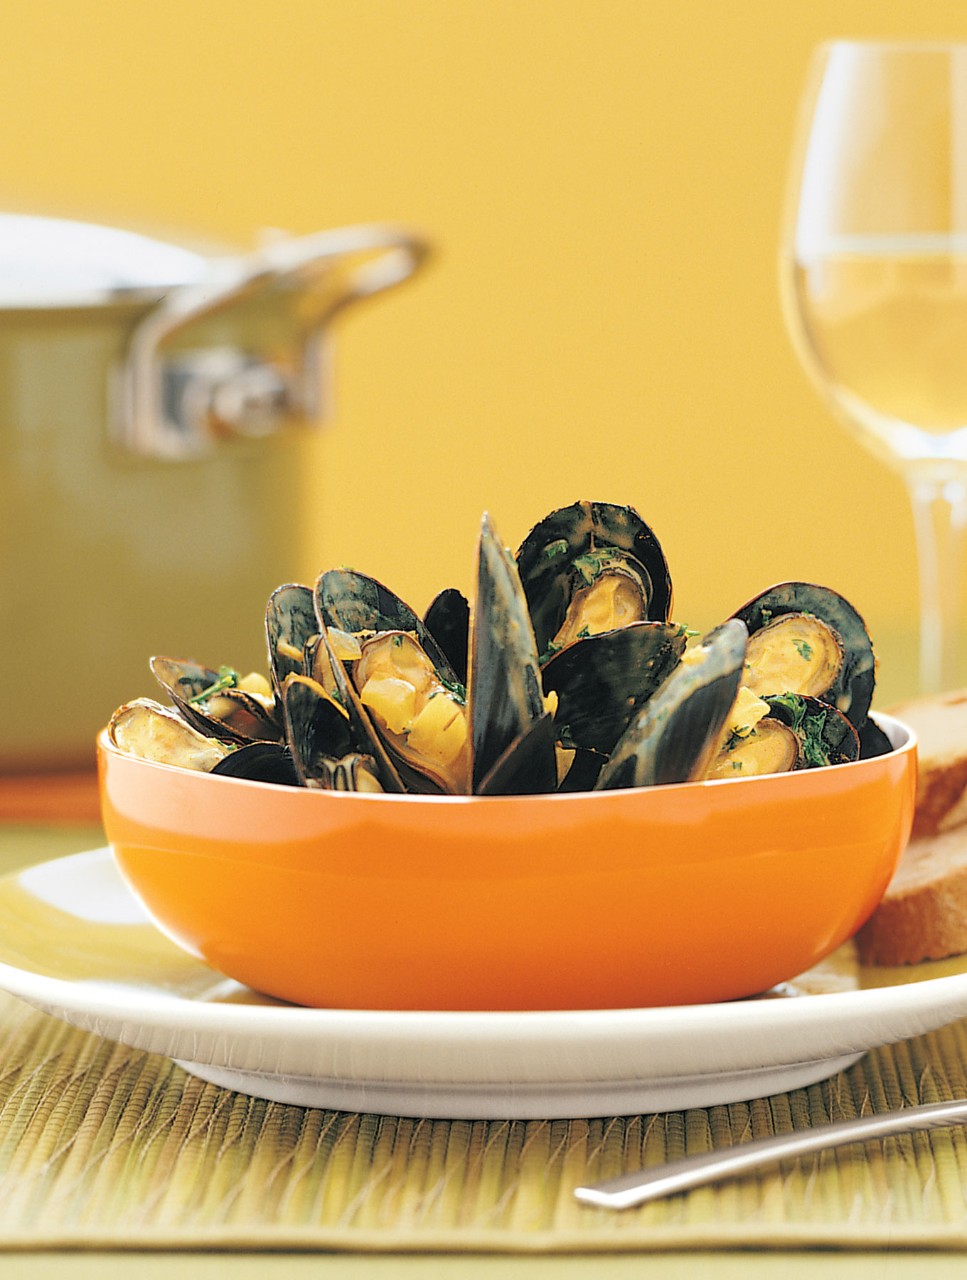 Spiced Mussels in White Wine